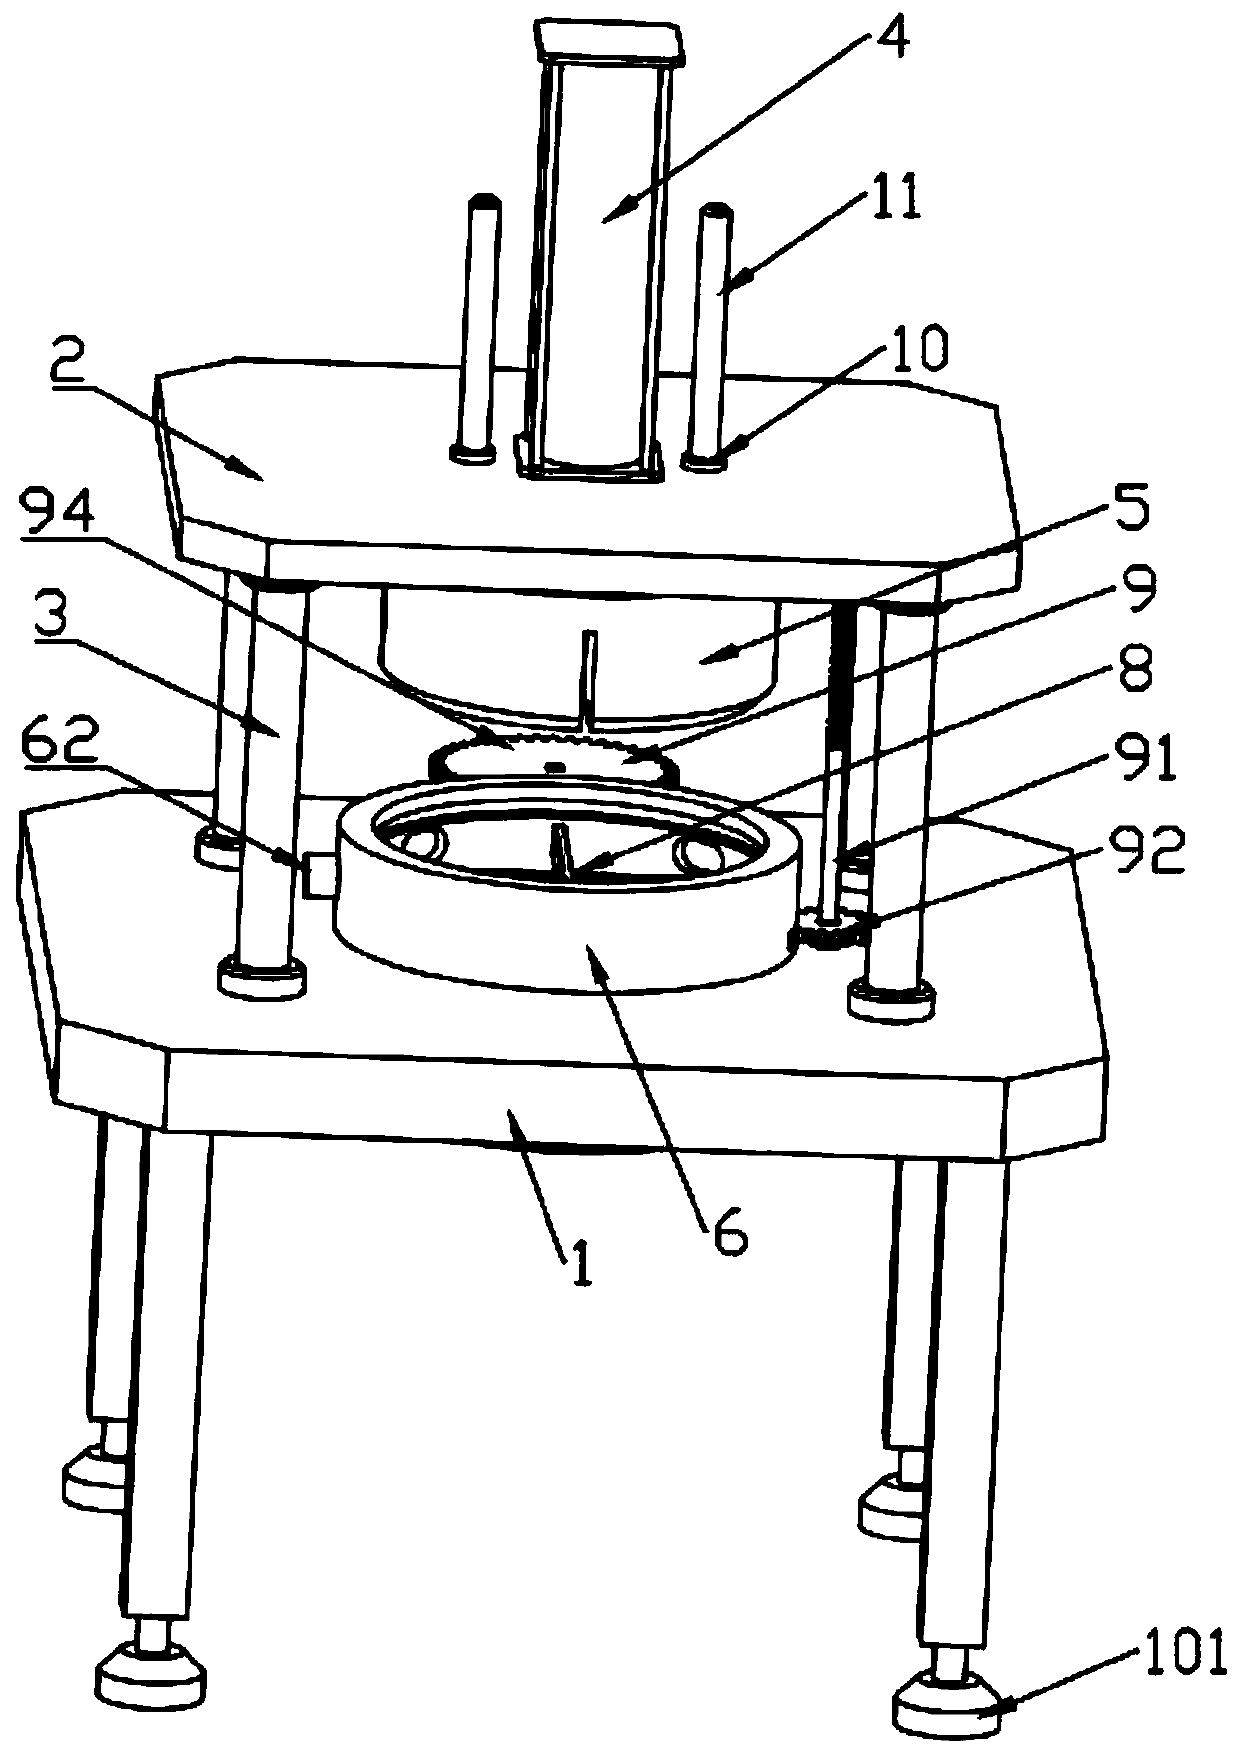 Traditional Chinese medicinal material pressing and cutting device